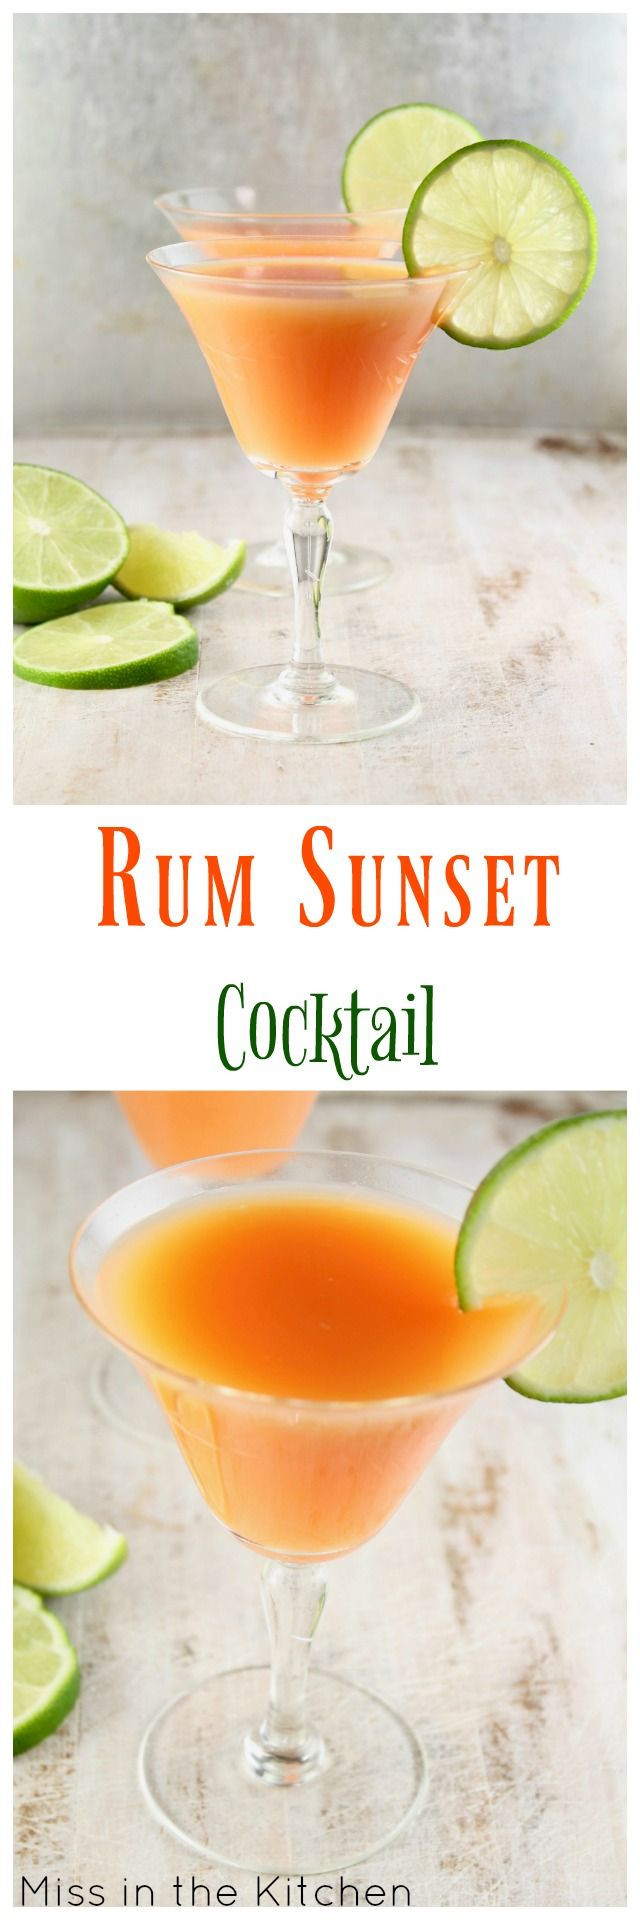 Best Mixed Drinks With Rum
 Best 25 Spiced rum drinks ideas on Pinterest